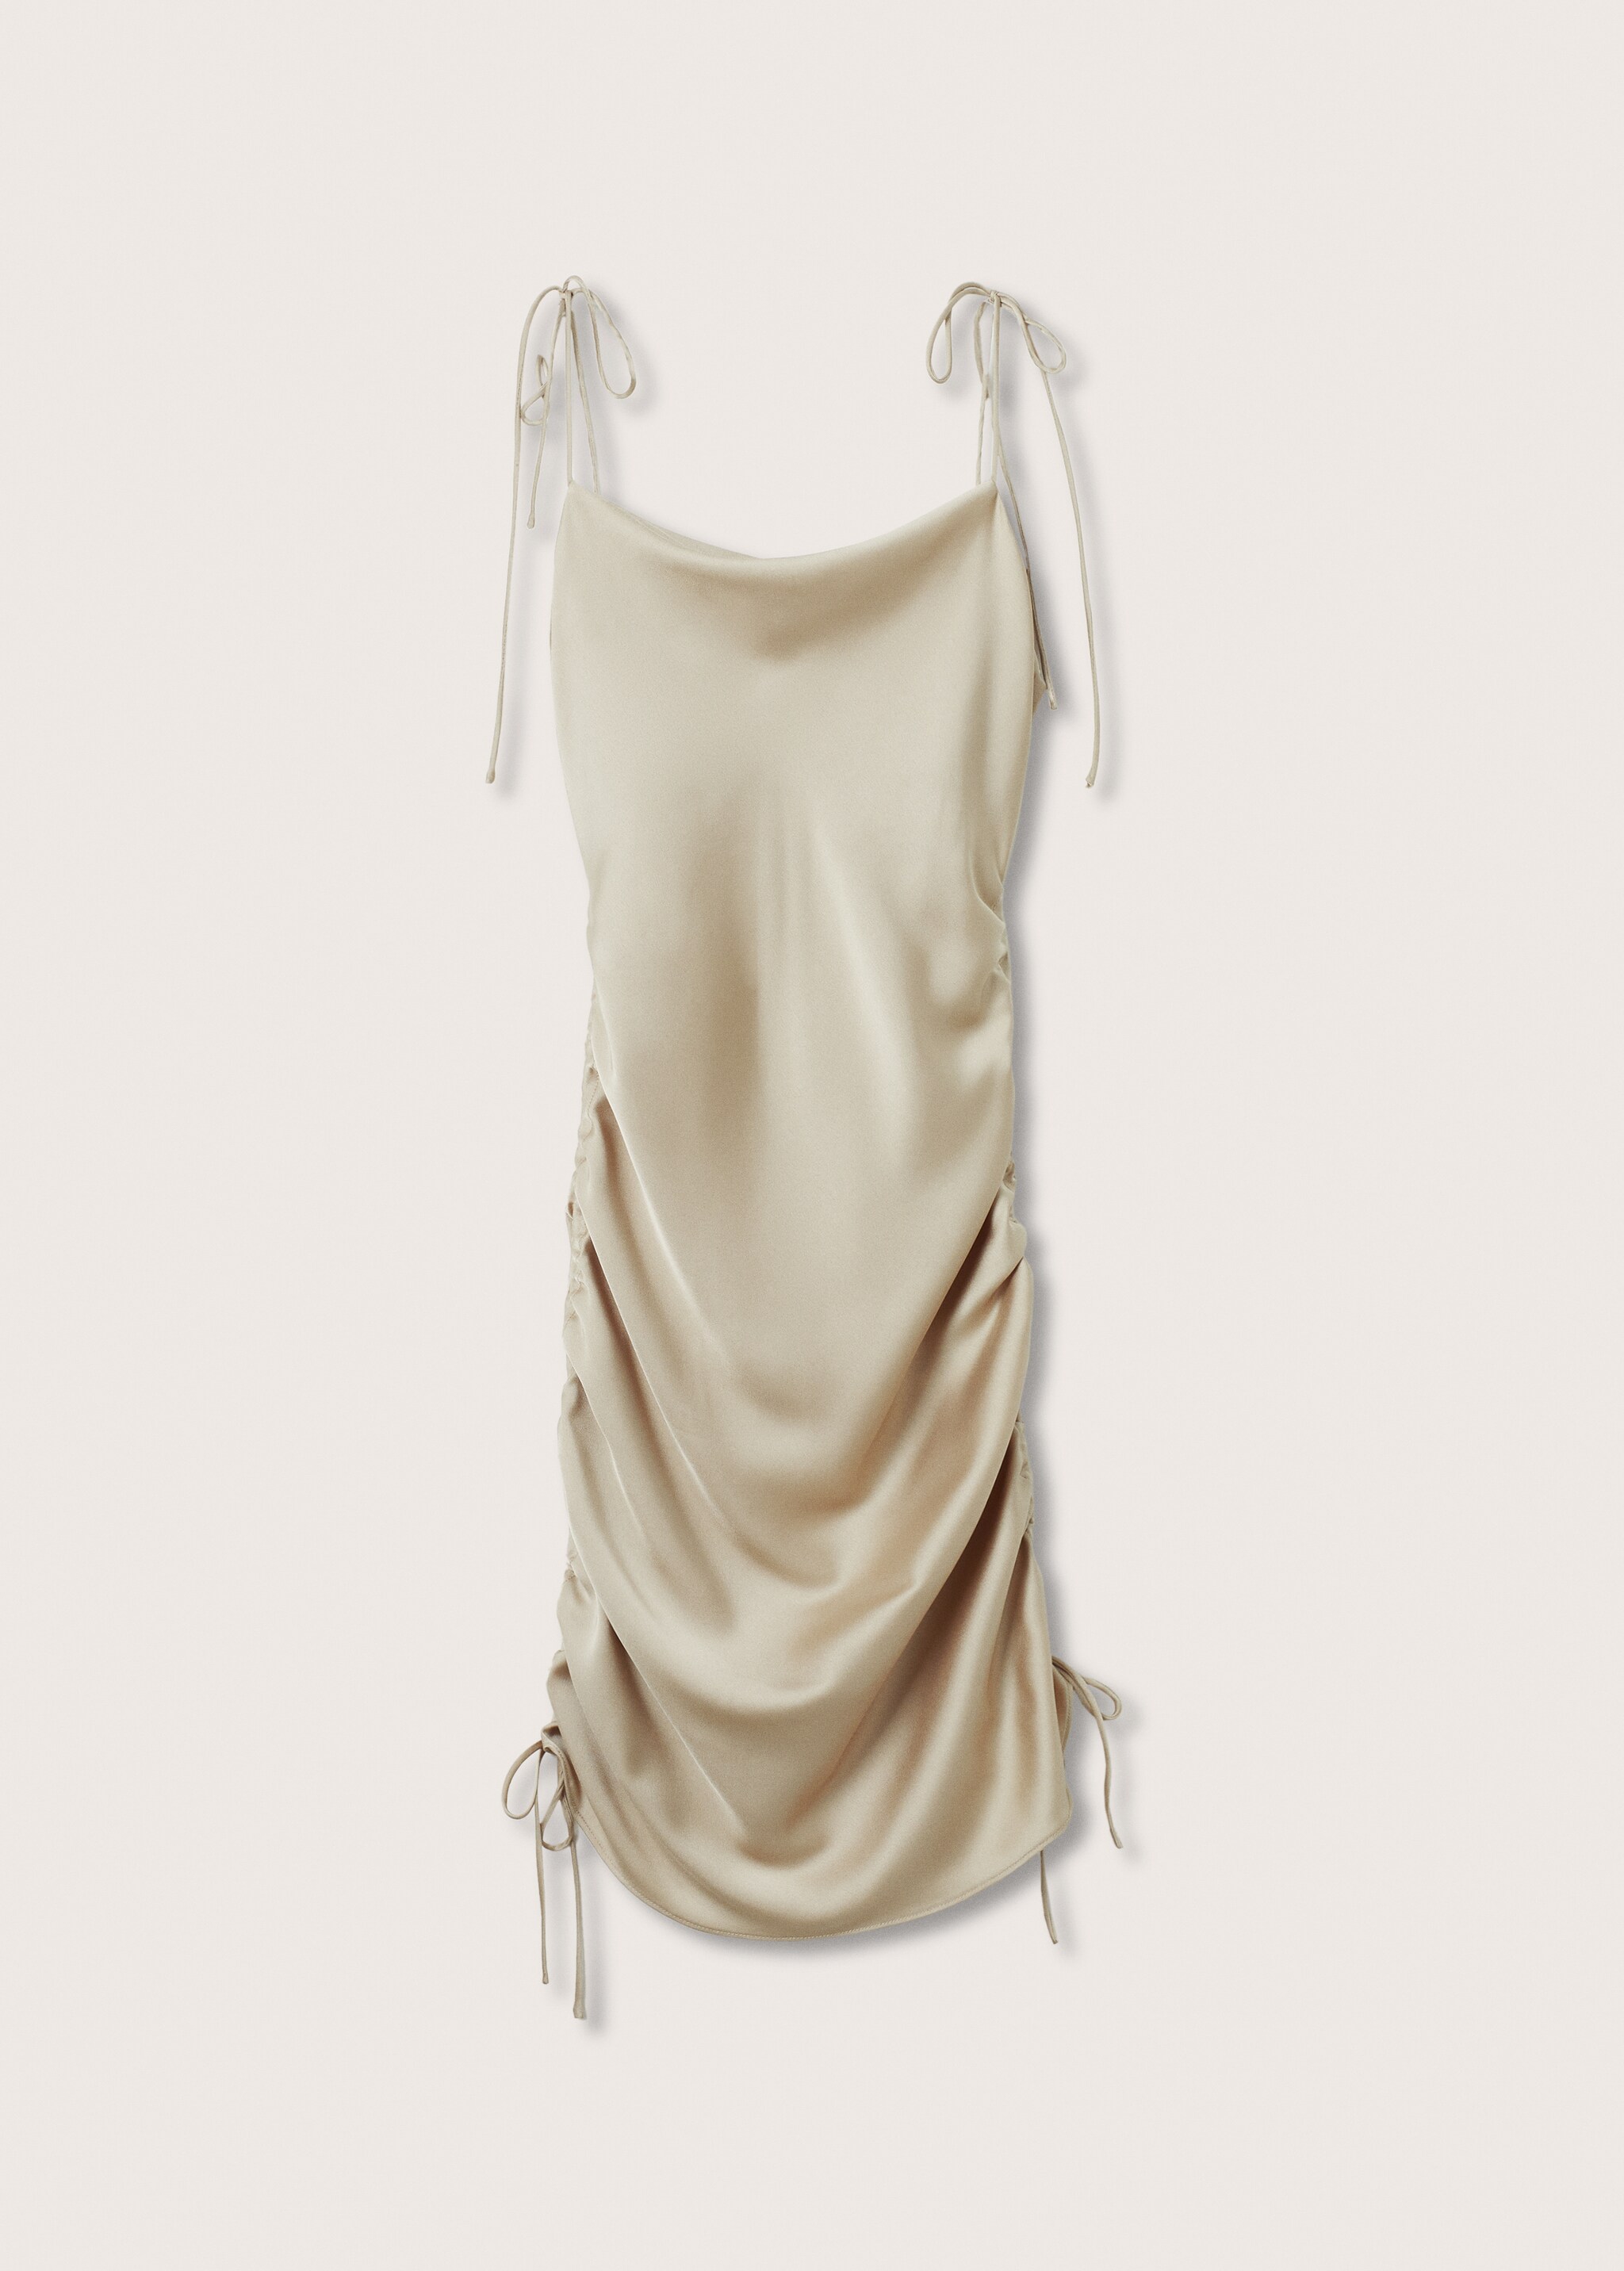 Ruched satin dress - Article without model